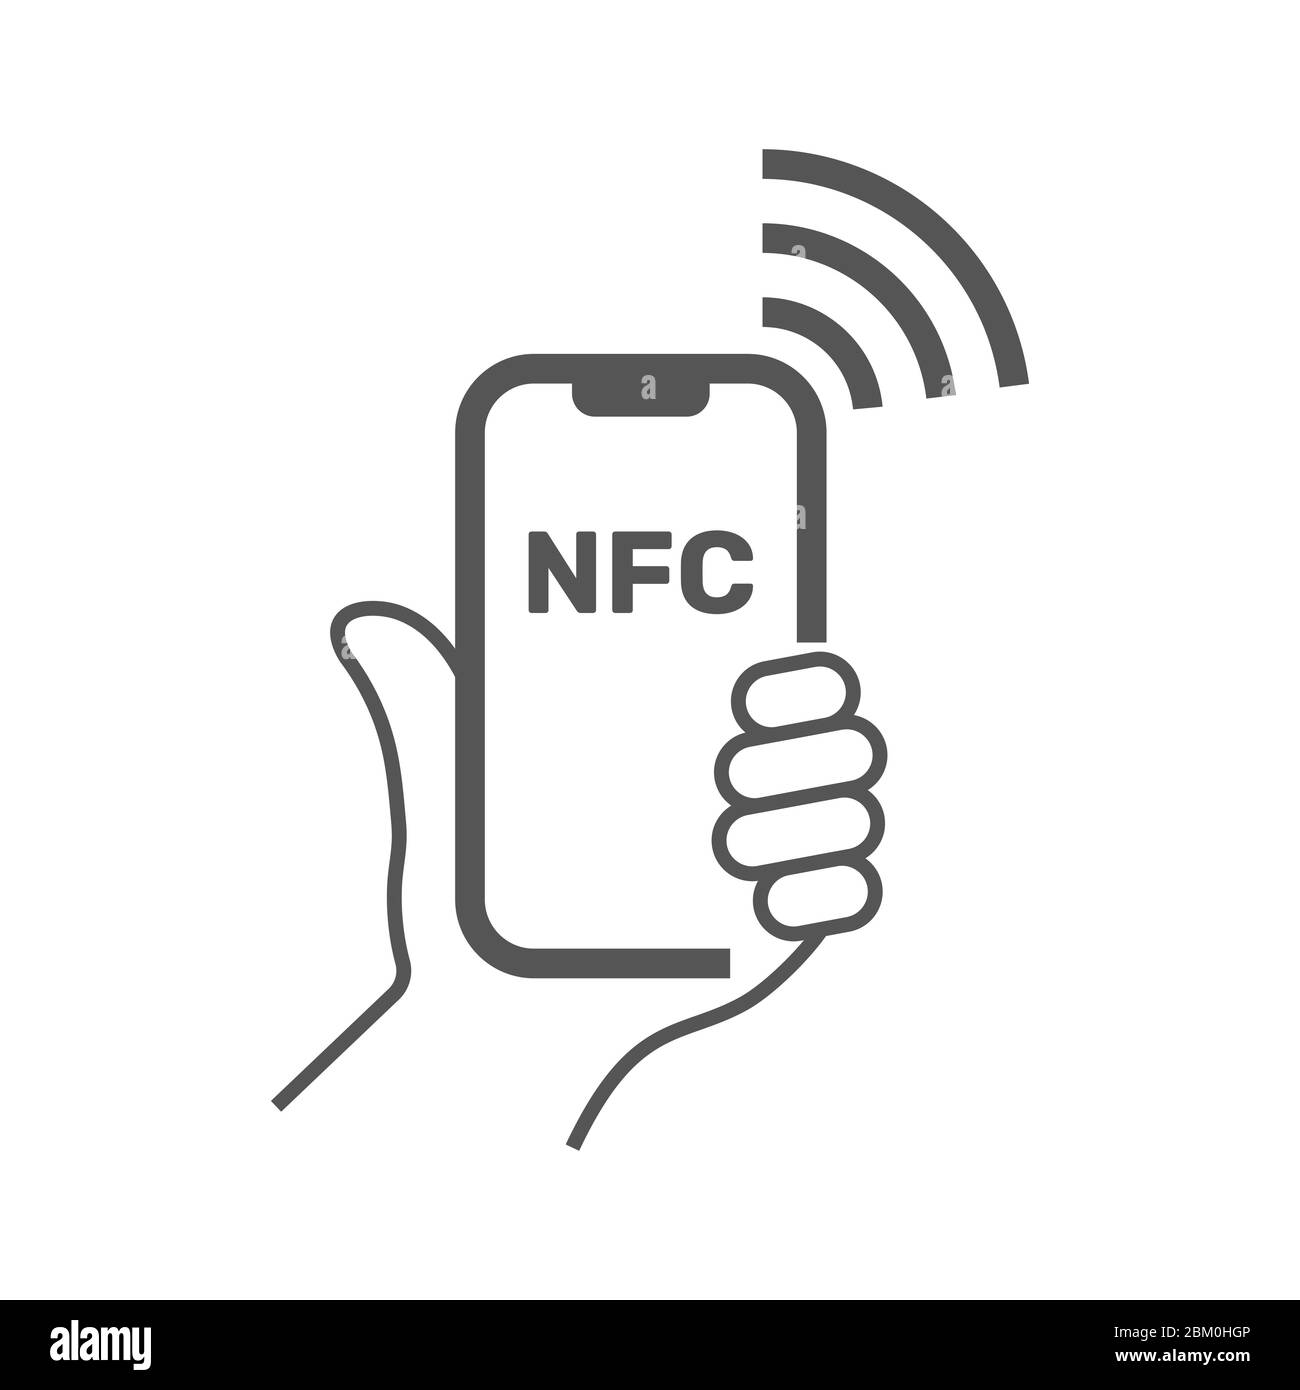 Near field communication, mobile phone with NFC module in hand, payment using smartphone, NFC vector line icon for apps and websites. Editable Stroke Stock Vector